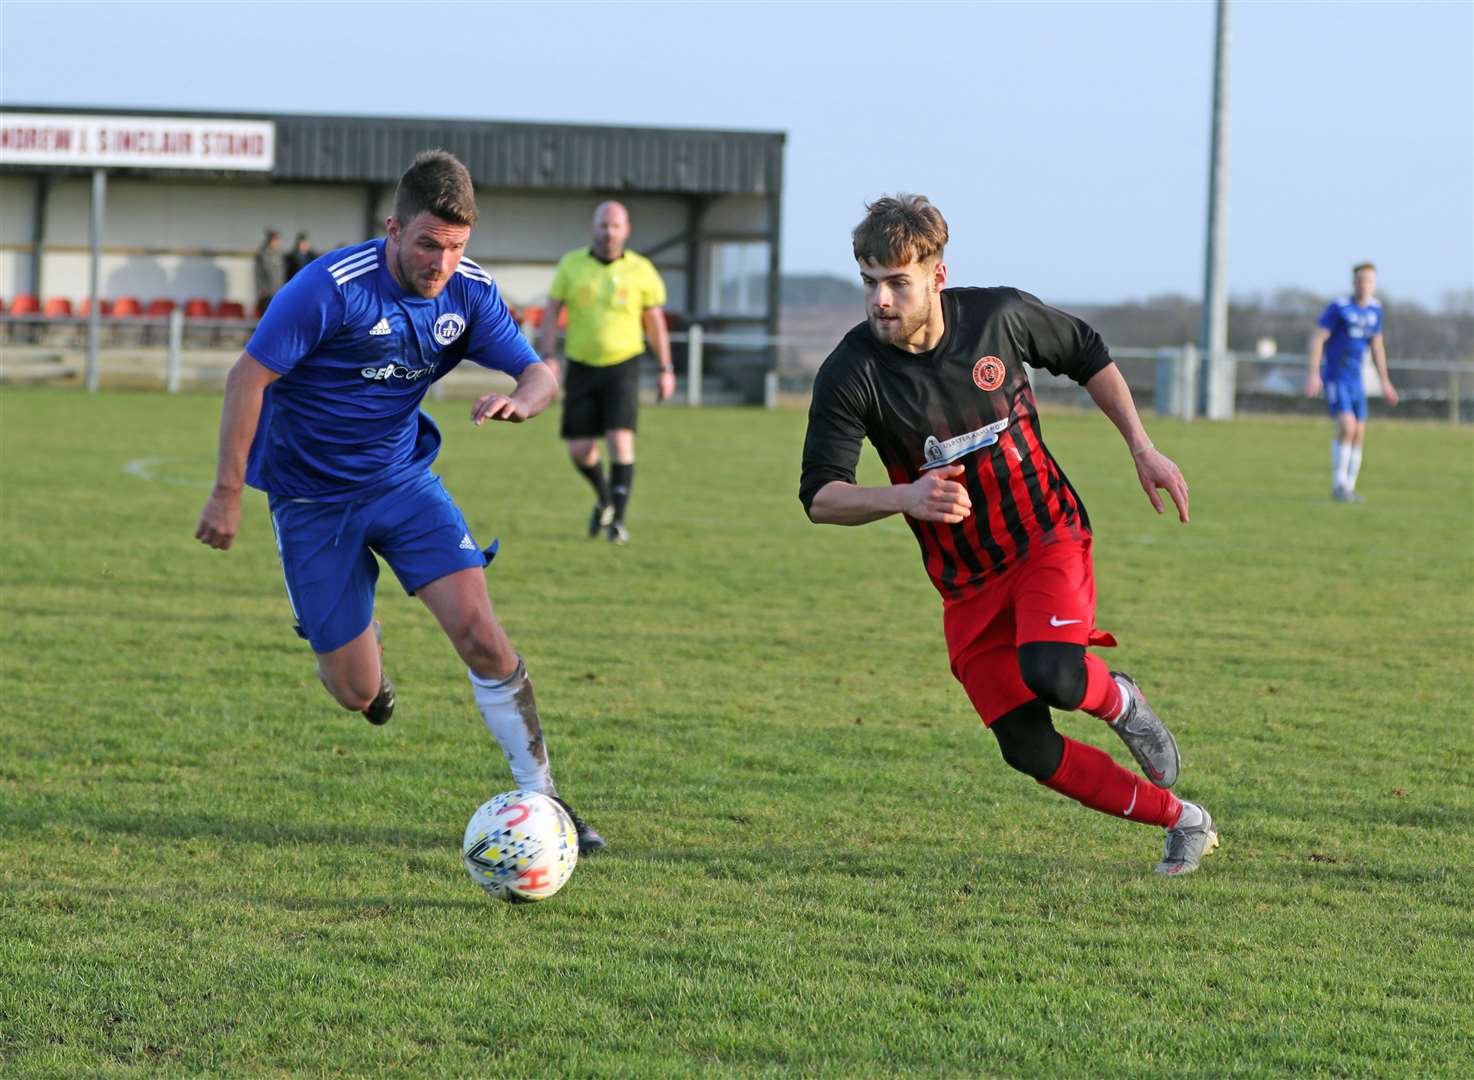 Halkirk United striker Jonah Martens tries to get past Invergordon's Callum Gow during the Anglers' 4-2 victory in a league match at Morrison Park earlier this month. Picture: James Gunn